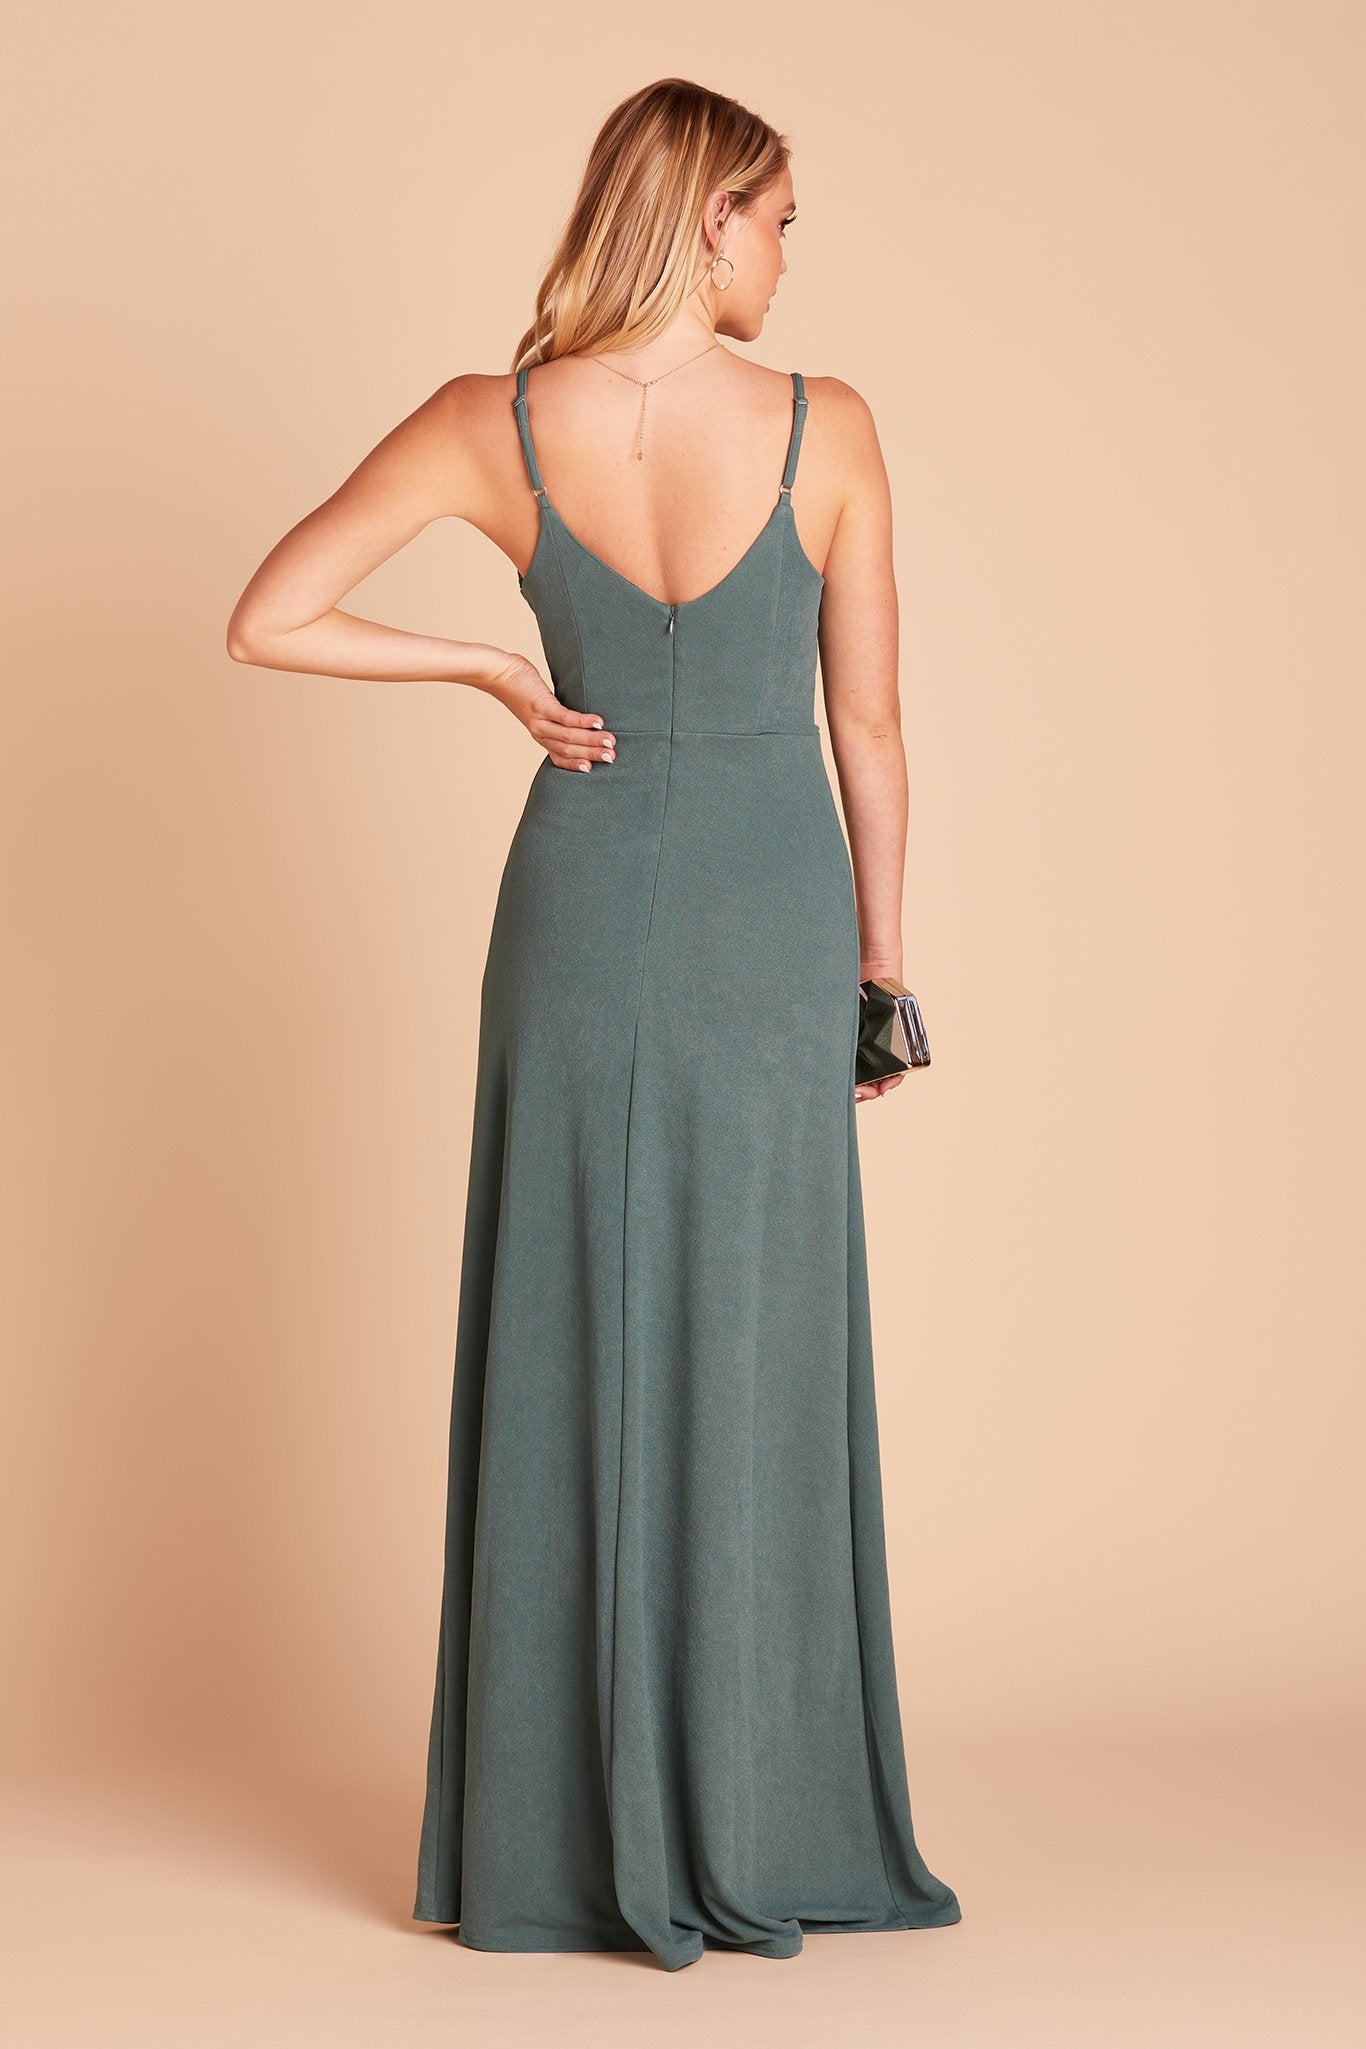 Jay bridesmaid dress with slit in sea glass green crepe by Birdy Grey, back view